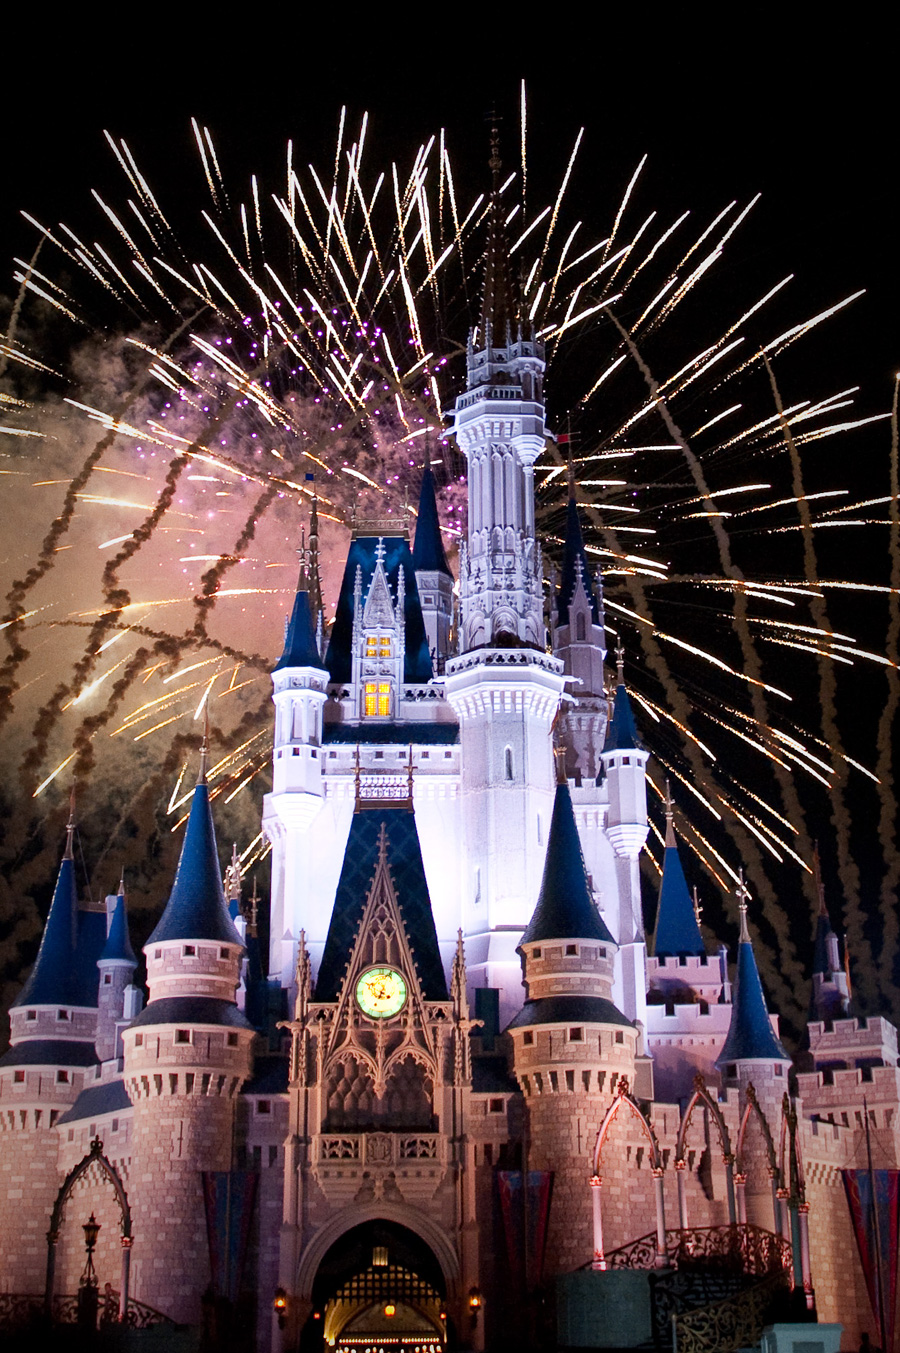 Disney 4Th Of July Images Wallpapers